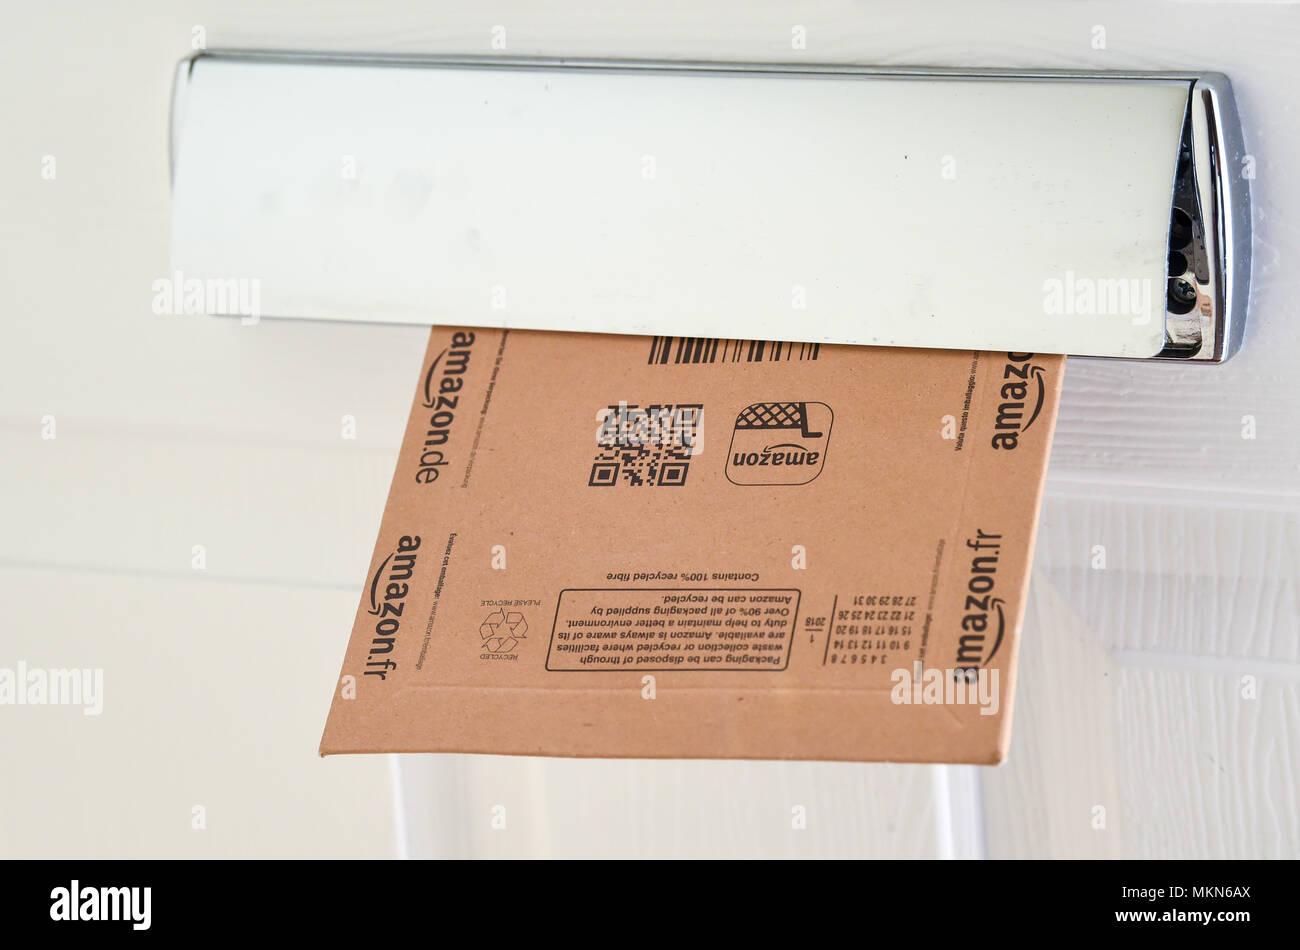 Amazon online shopping home delivery parcel in a household letter box  Photograph taken by Simon Dack Stock Photo